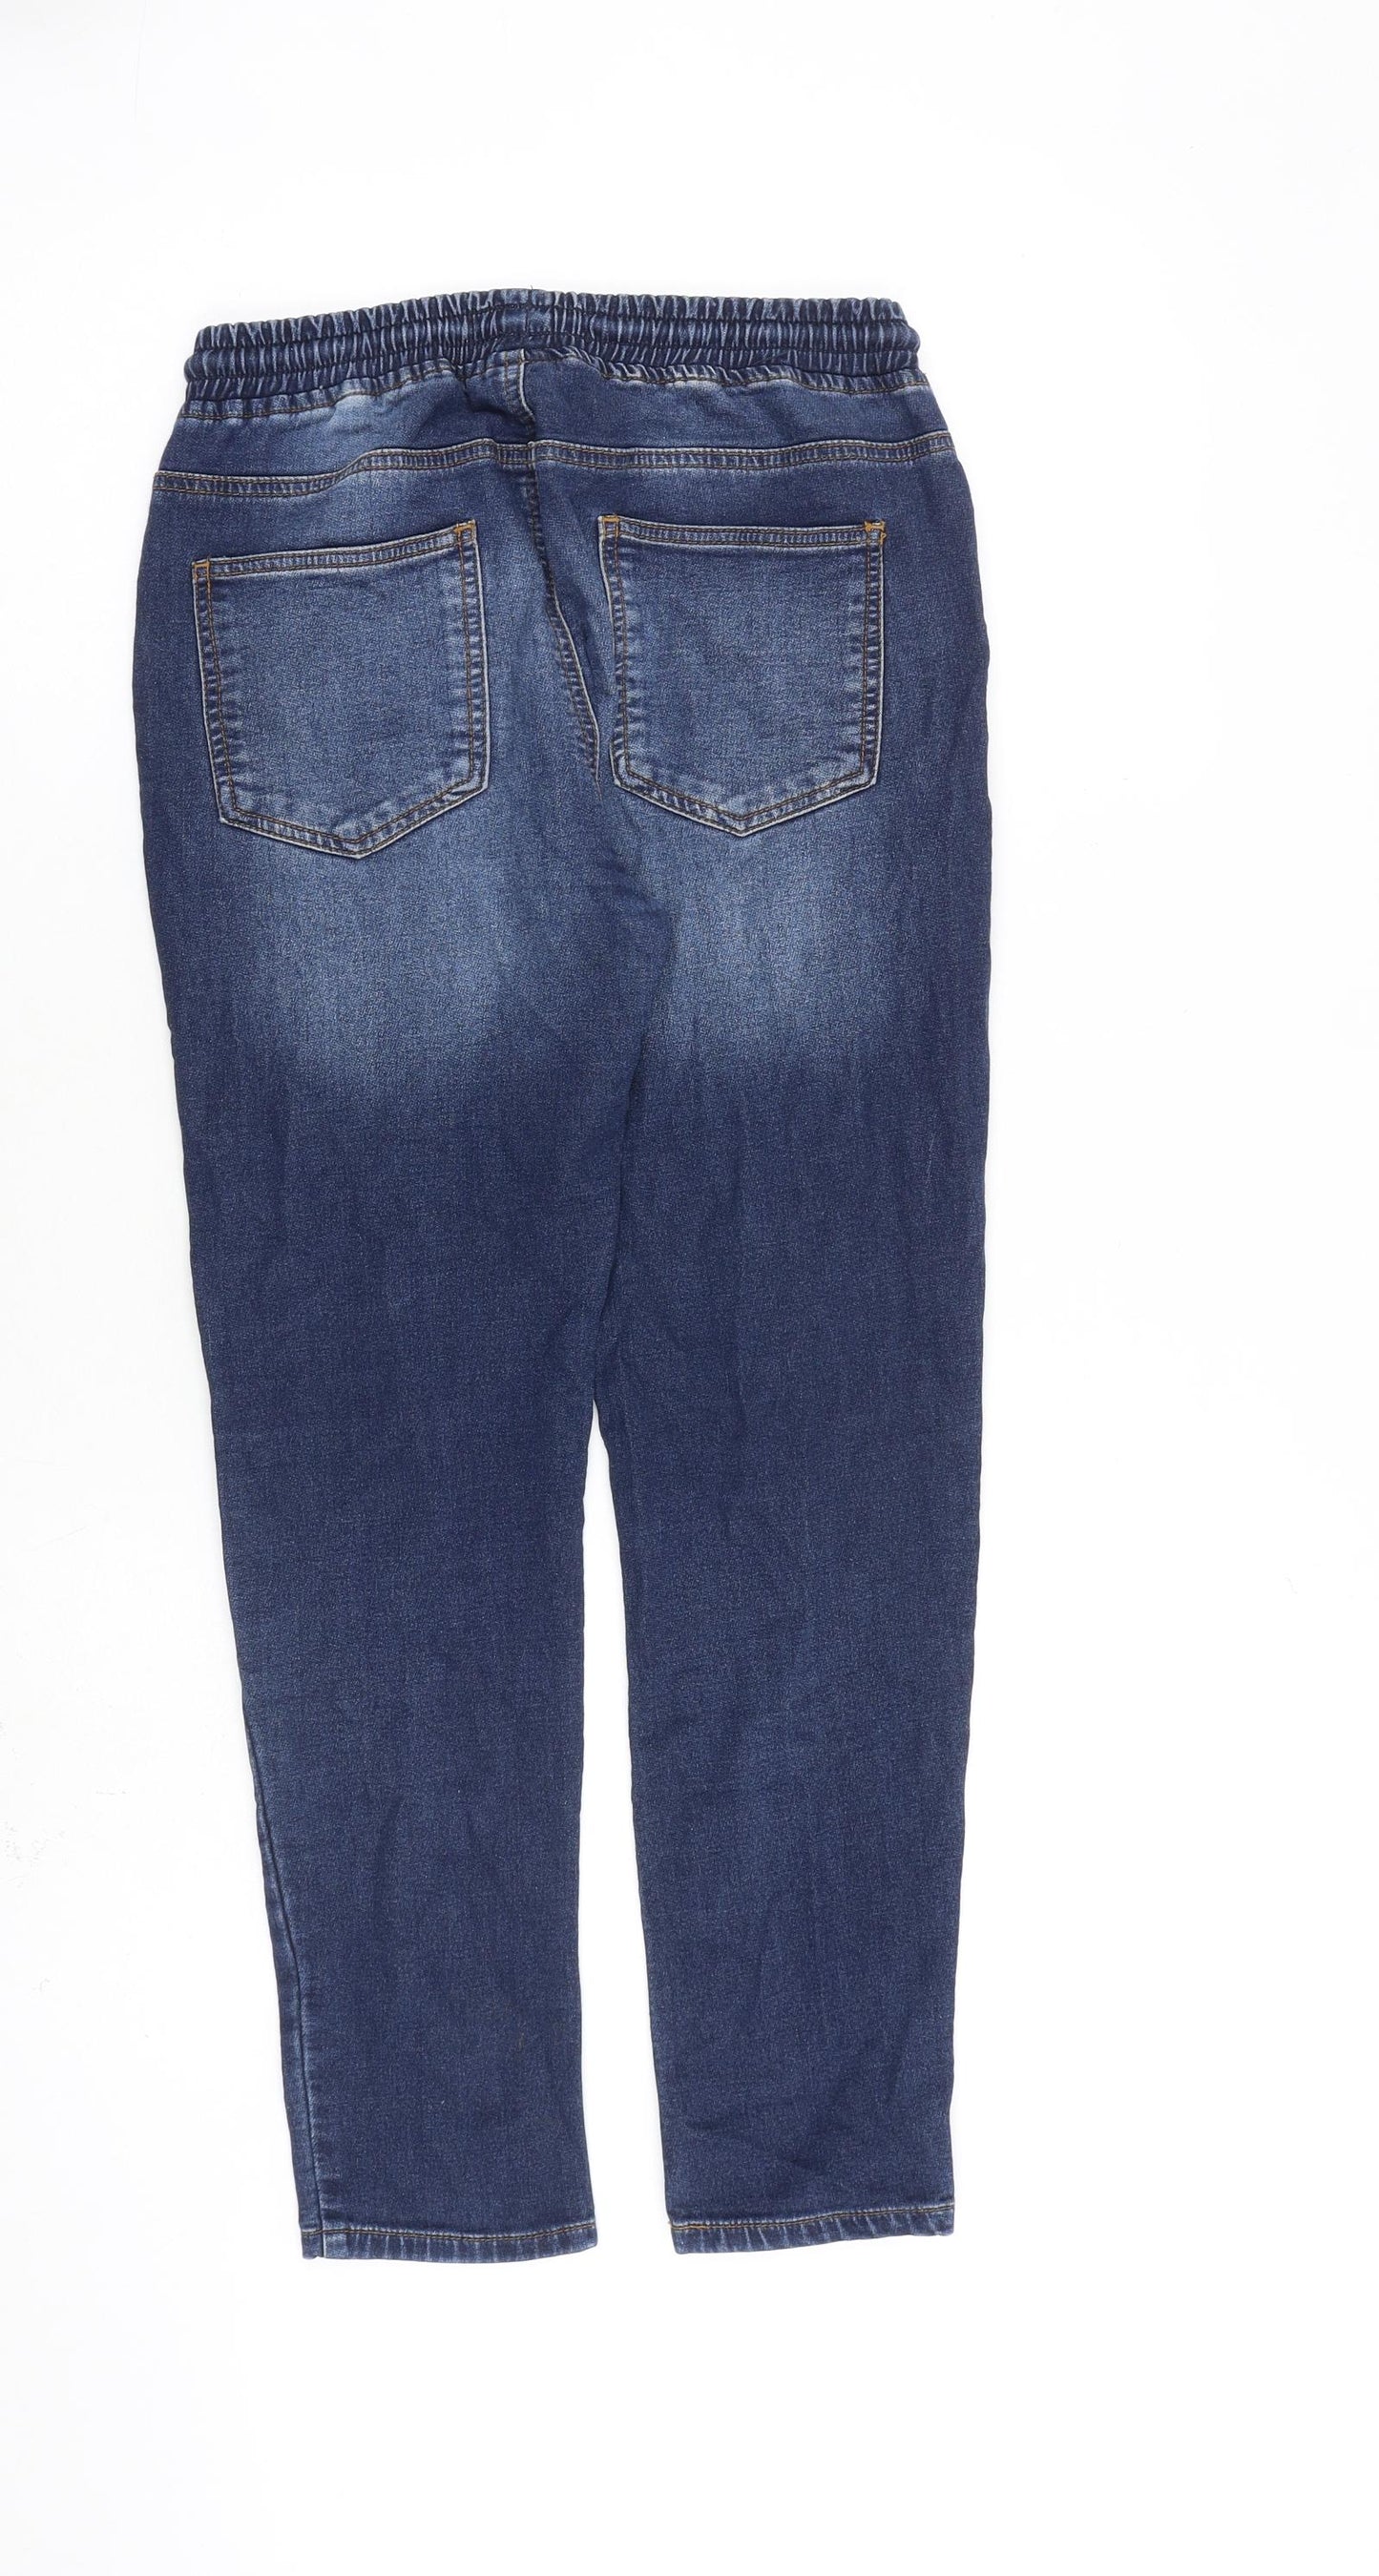 NEXT Womens Blue Cotton Tapered Jeans Size 12 L25 in Regular Drawstring